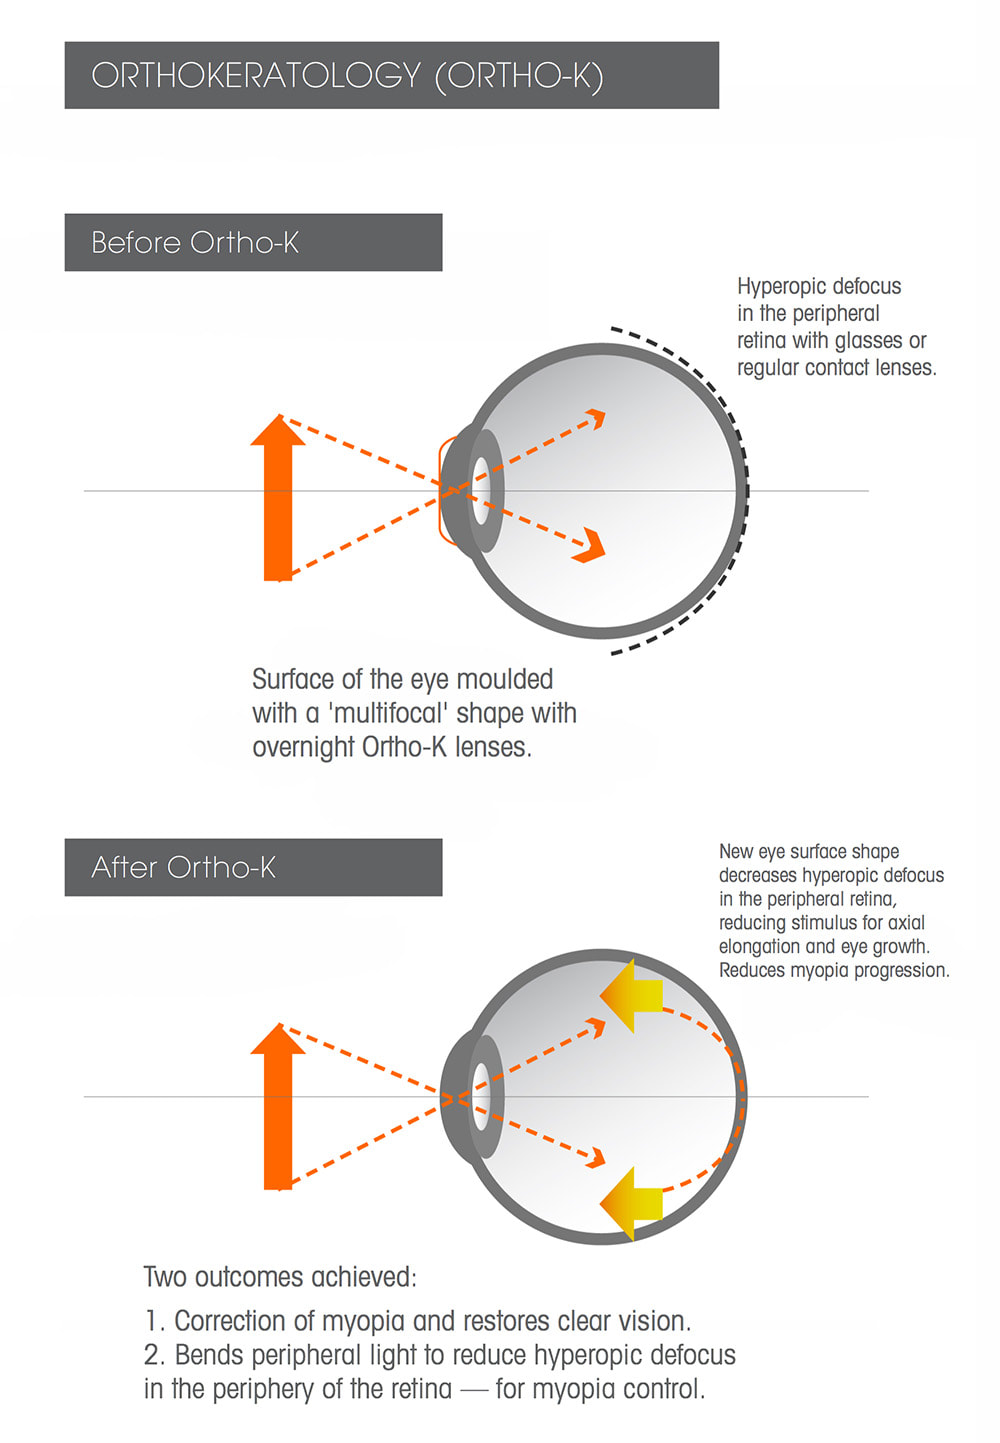 Ortho K lenses reshapes the cornea to create a multifocal effect, reducing hyperopic defocus at the peripheral retina.